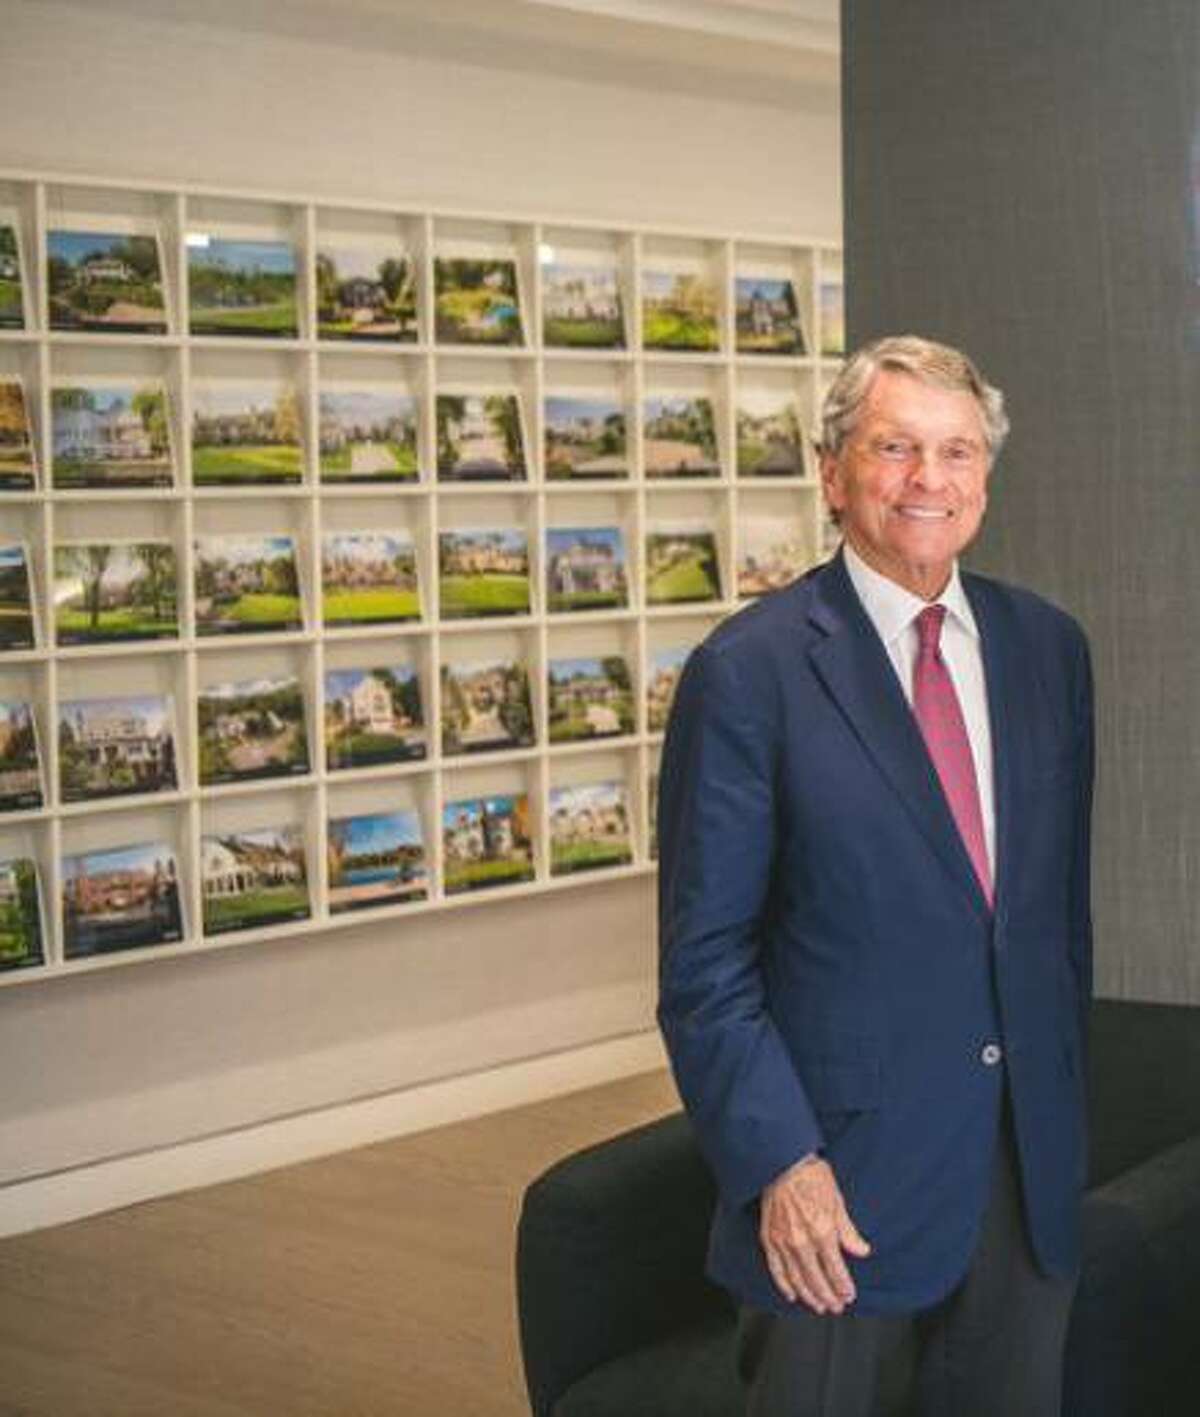 David Ogilvy, a longtime Greenwich real estate broker who most recently worked at Sotheby’s International Realty, died Monday, Feb. 3, 2020 at 77 years old.